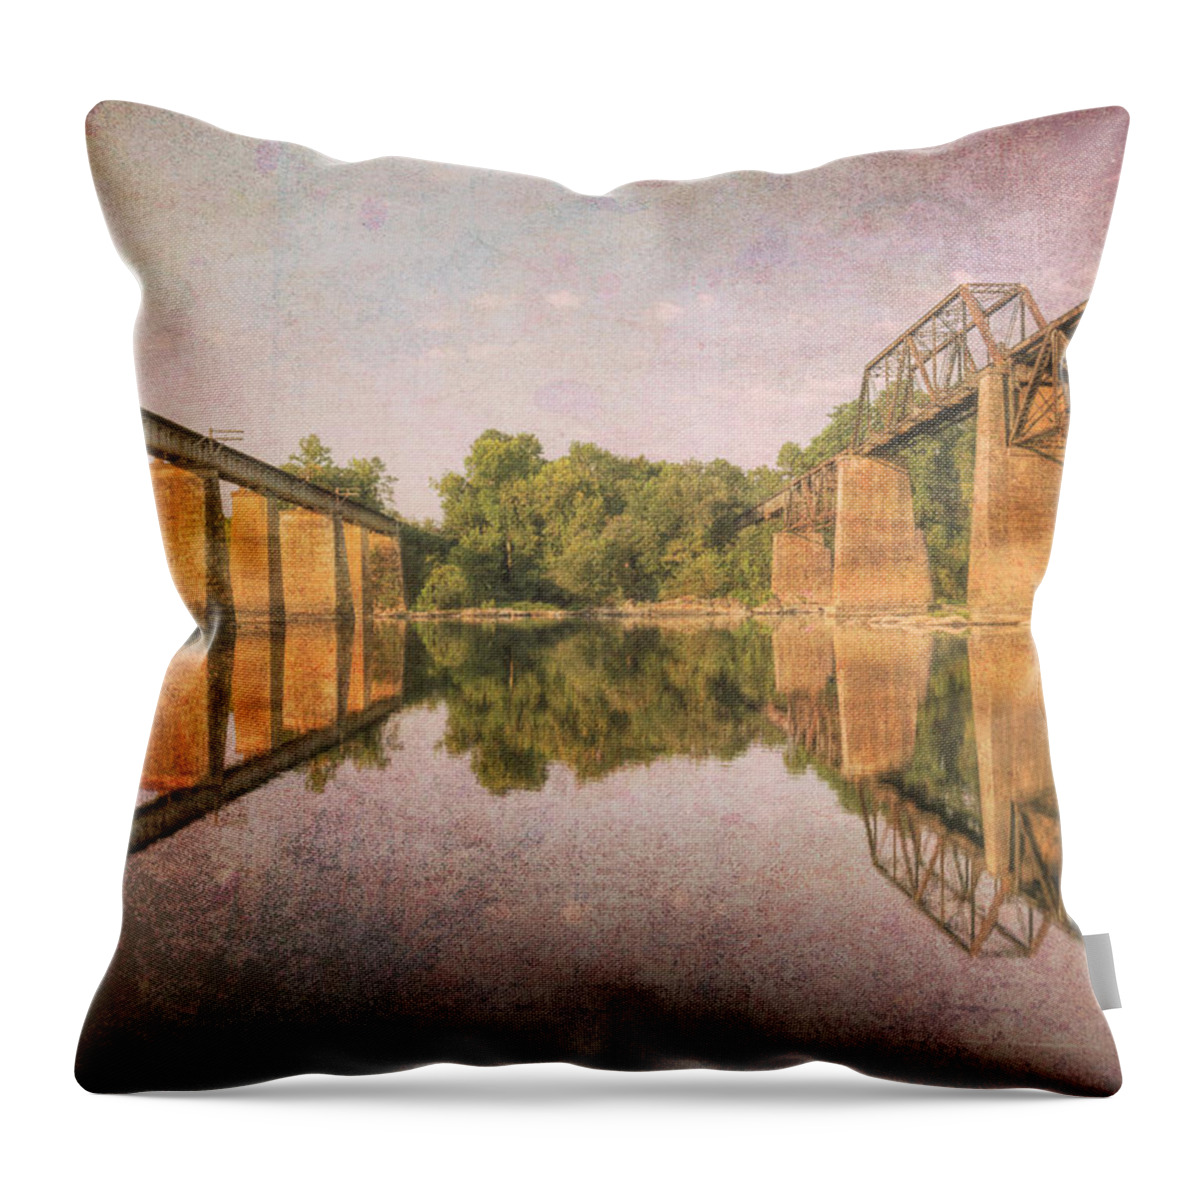 2010 Throw Pillow featuring the photograph Brickworks 13 by Charles Hite